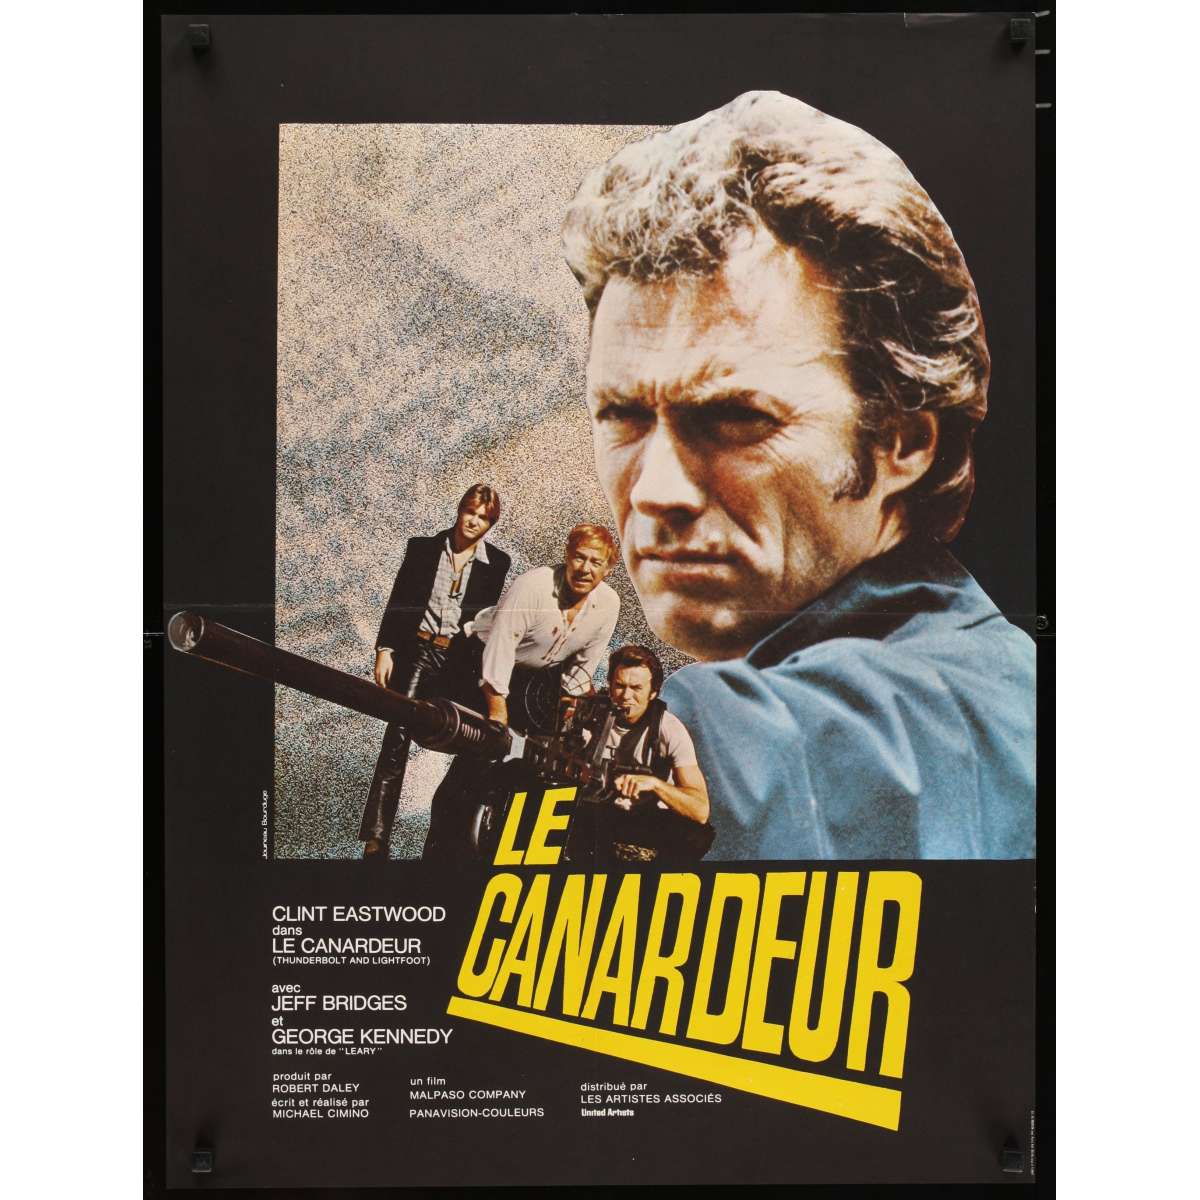 Thunderbolt and Lightfoot Clint Eastwood Repro Film Poster 